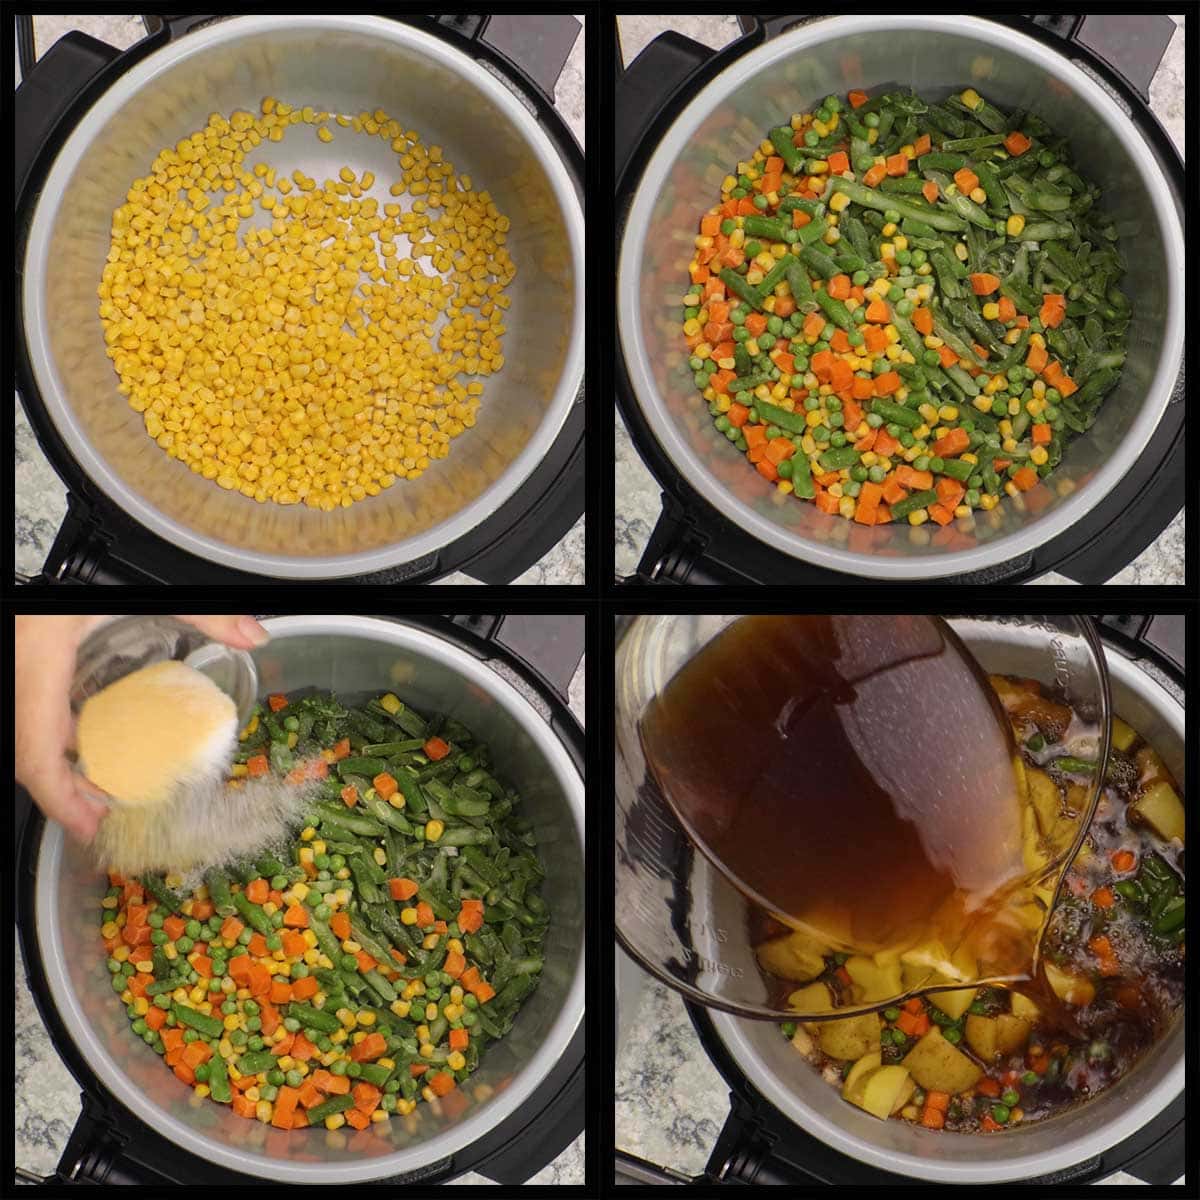 adding vegetables and seasonings to inner pot to make the soup.